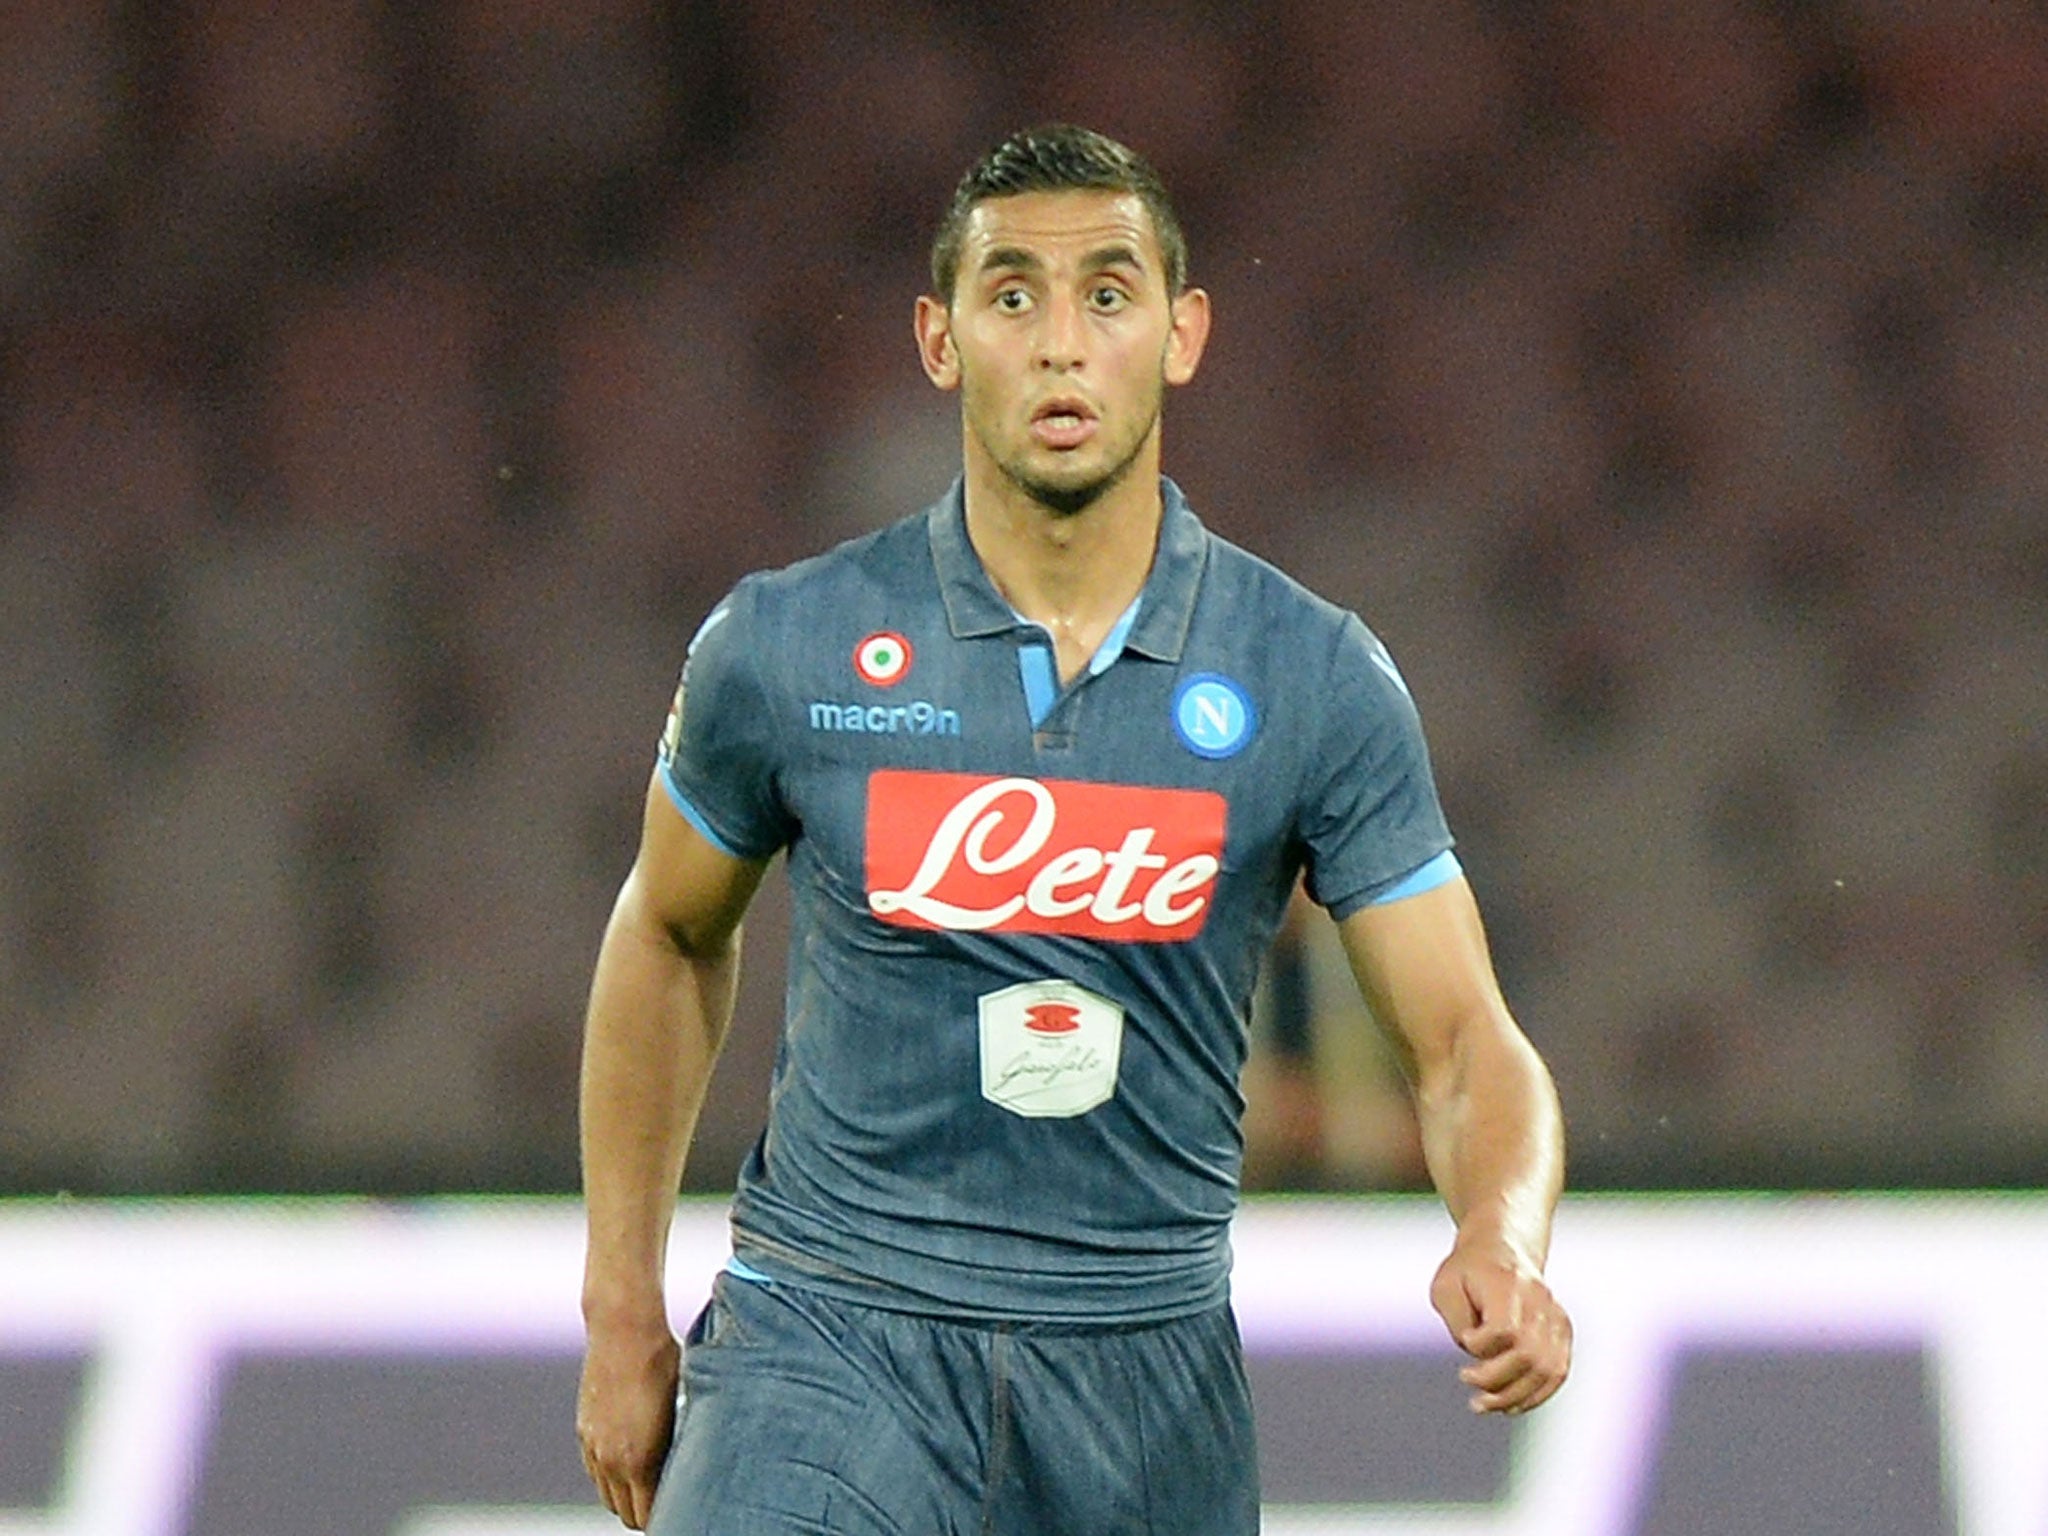 Faouzi Ghoulam in action for Napoli